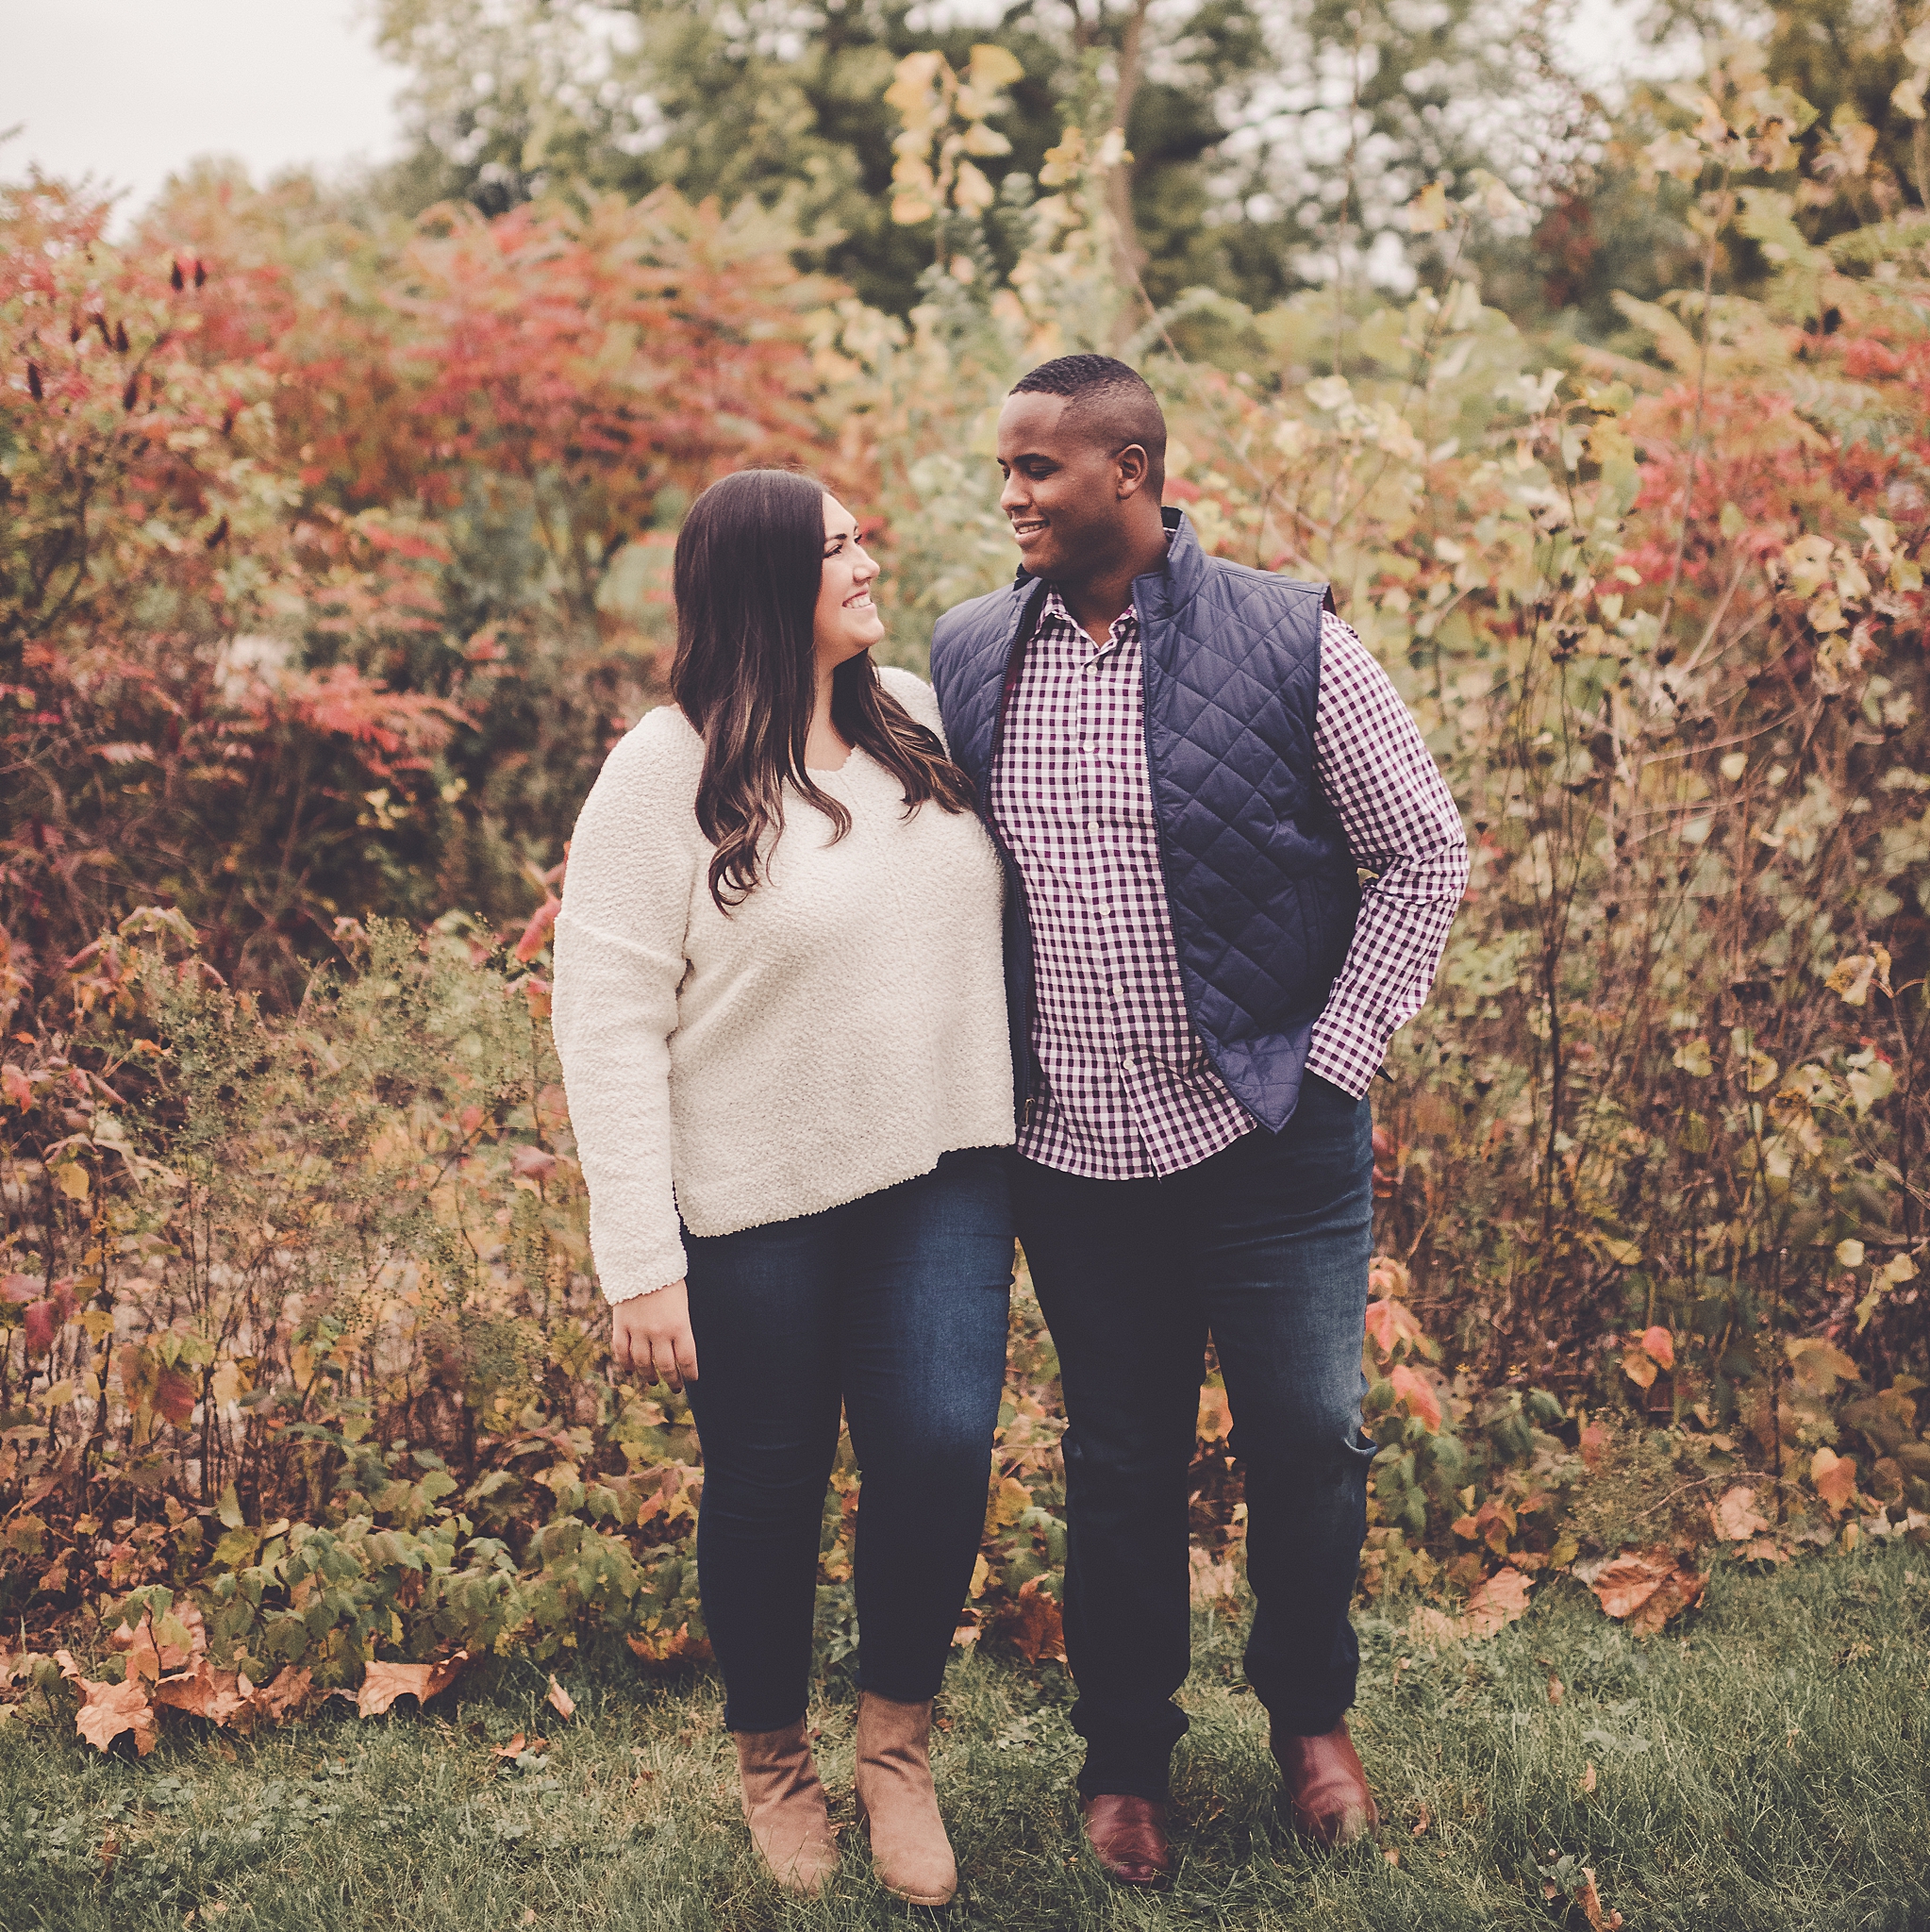 Jess and Dmarte's downtown Geneva and Fabyan Forest Preserve engagement with Chicagoland wedding photographer Kara Evans Photographer.